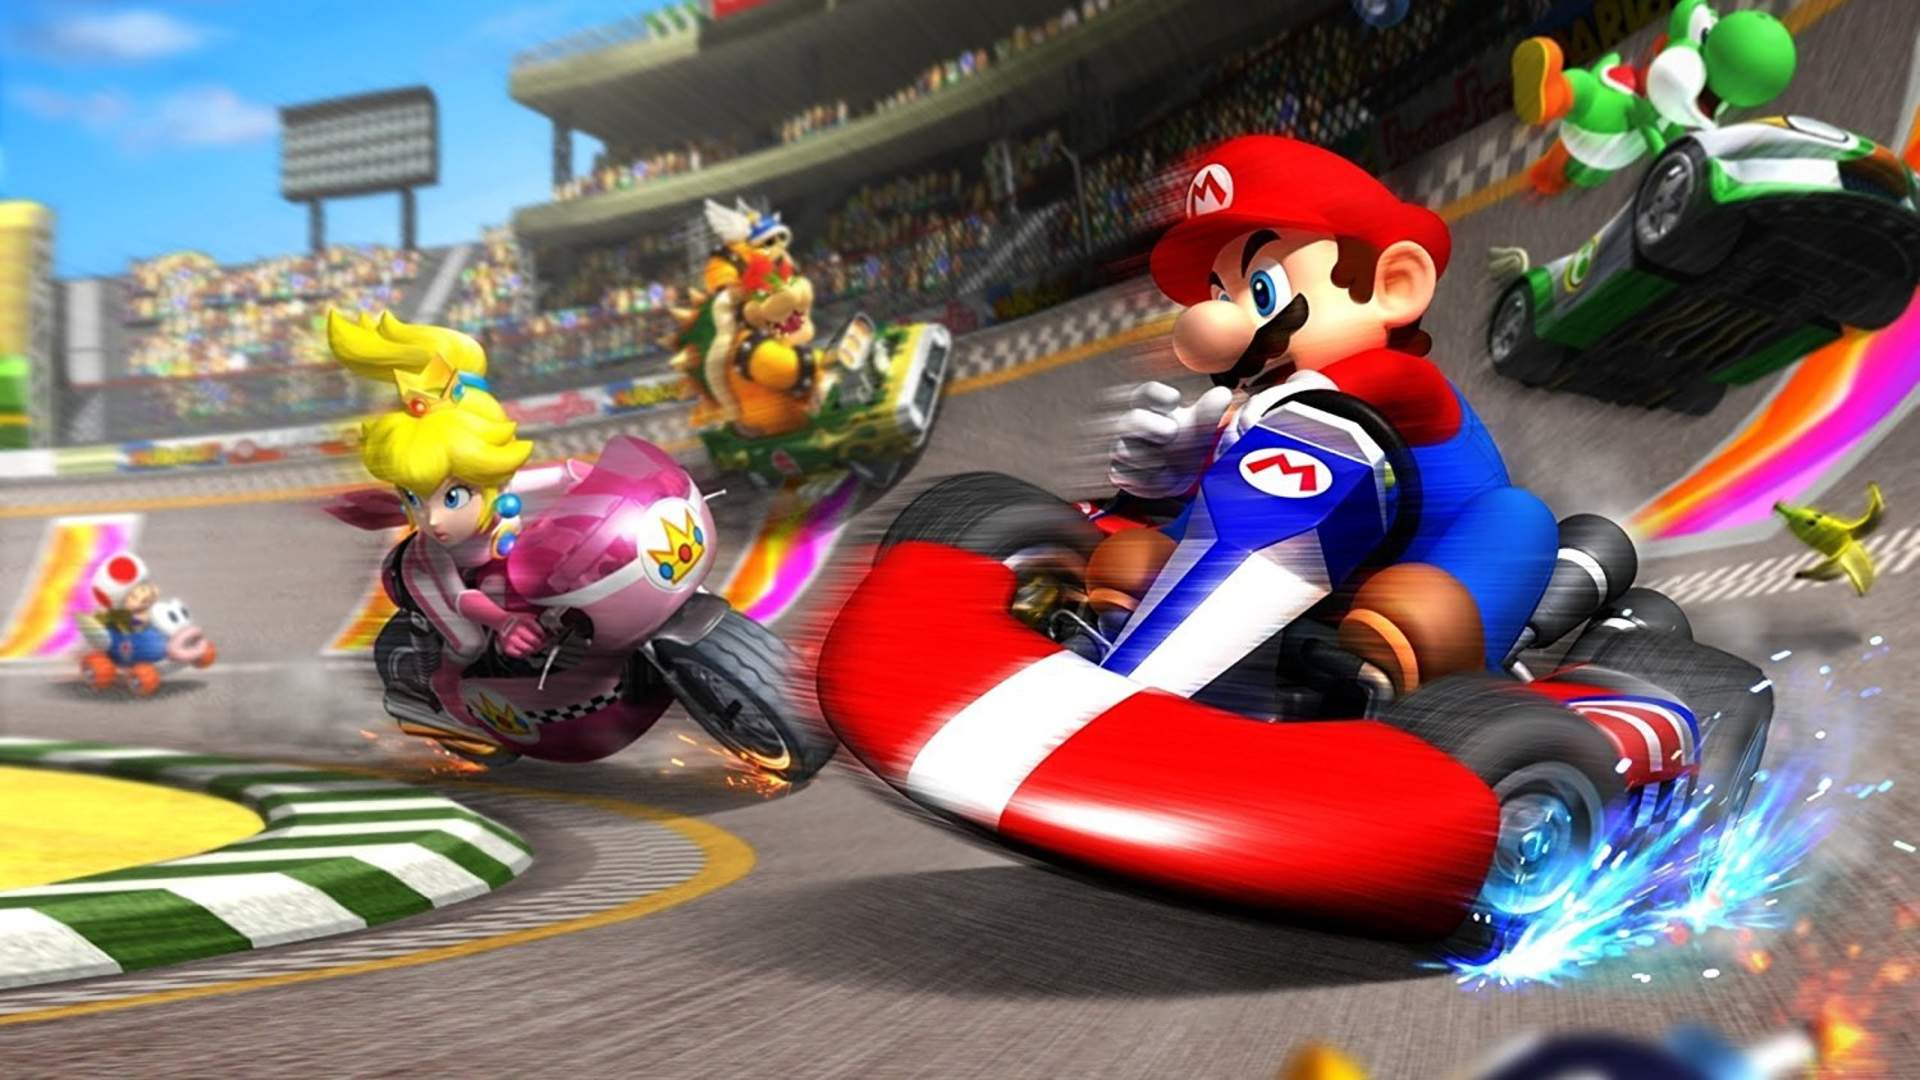 Mario Kart Tour Beta Impressions are Out, and It Looks Like It Has